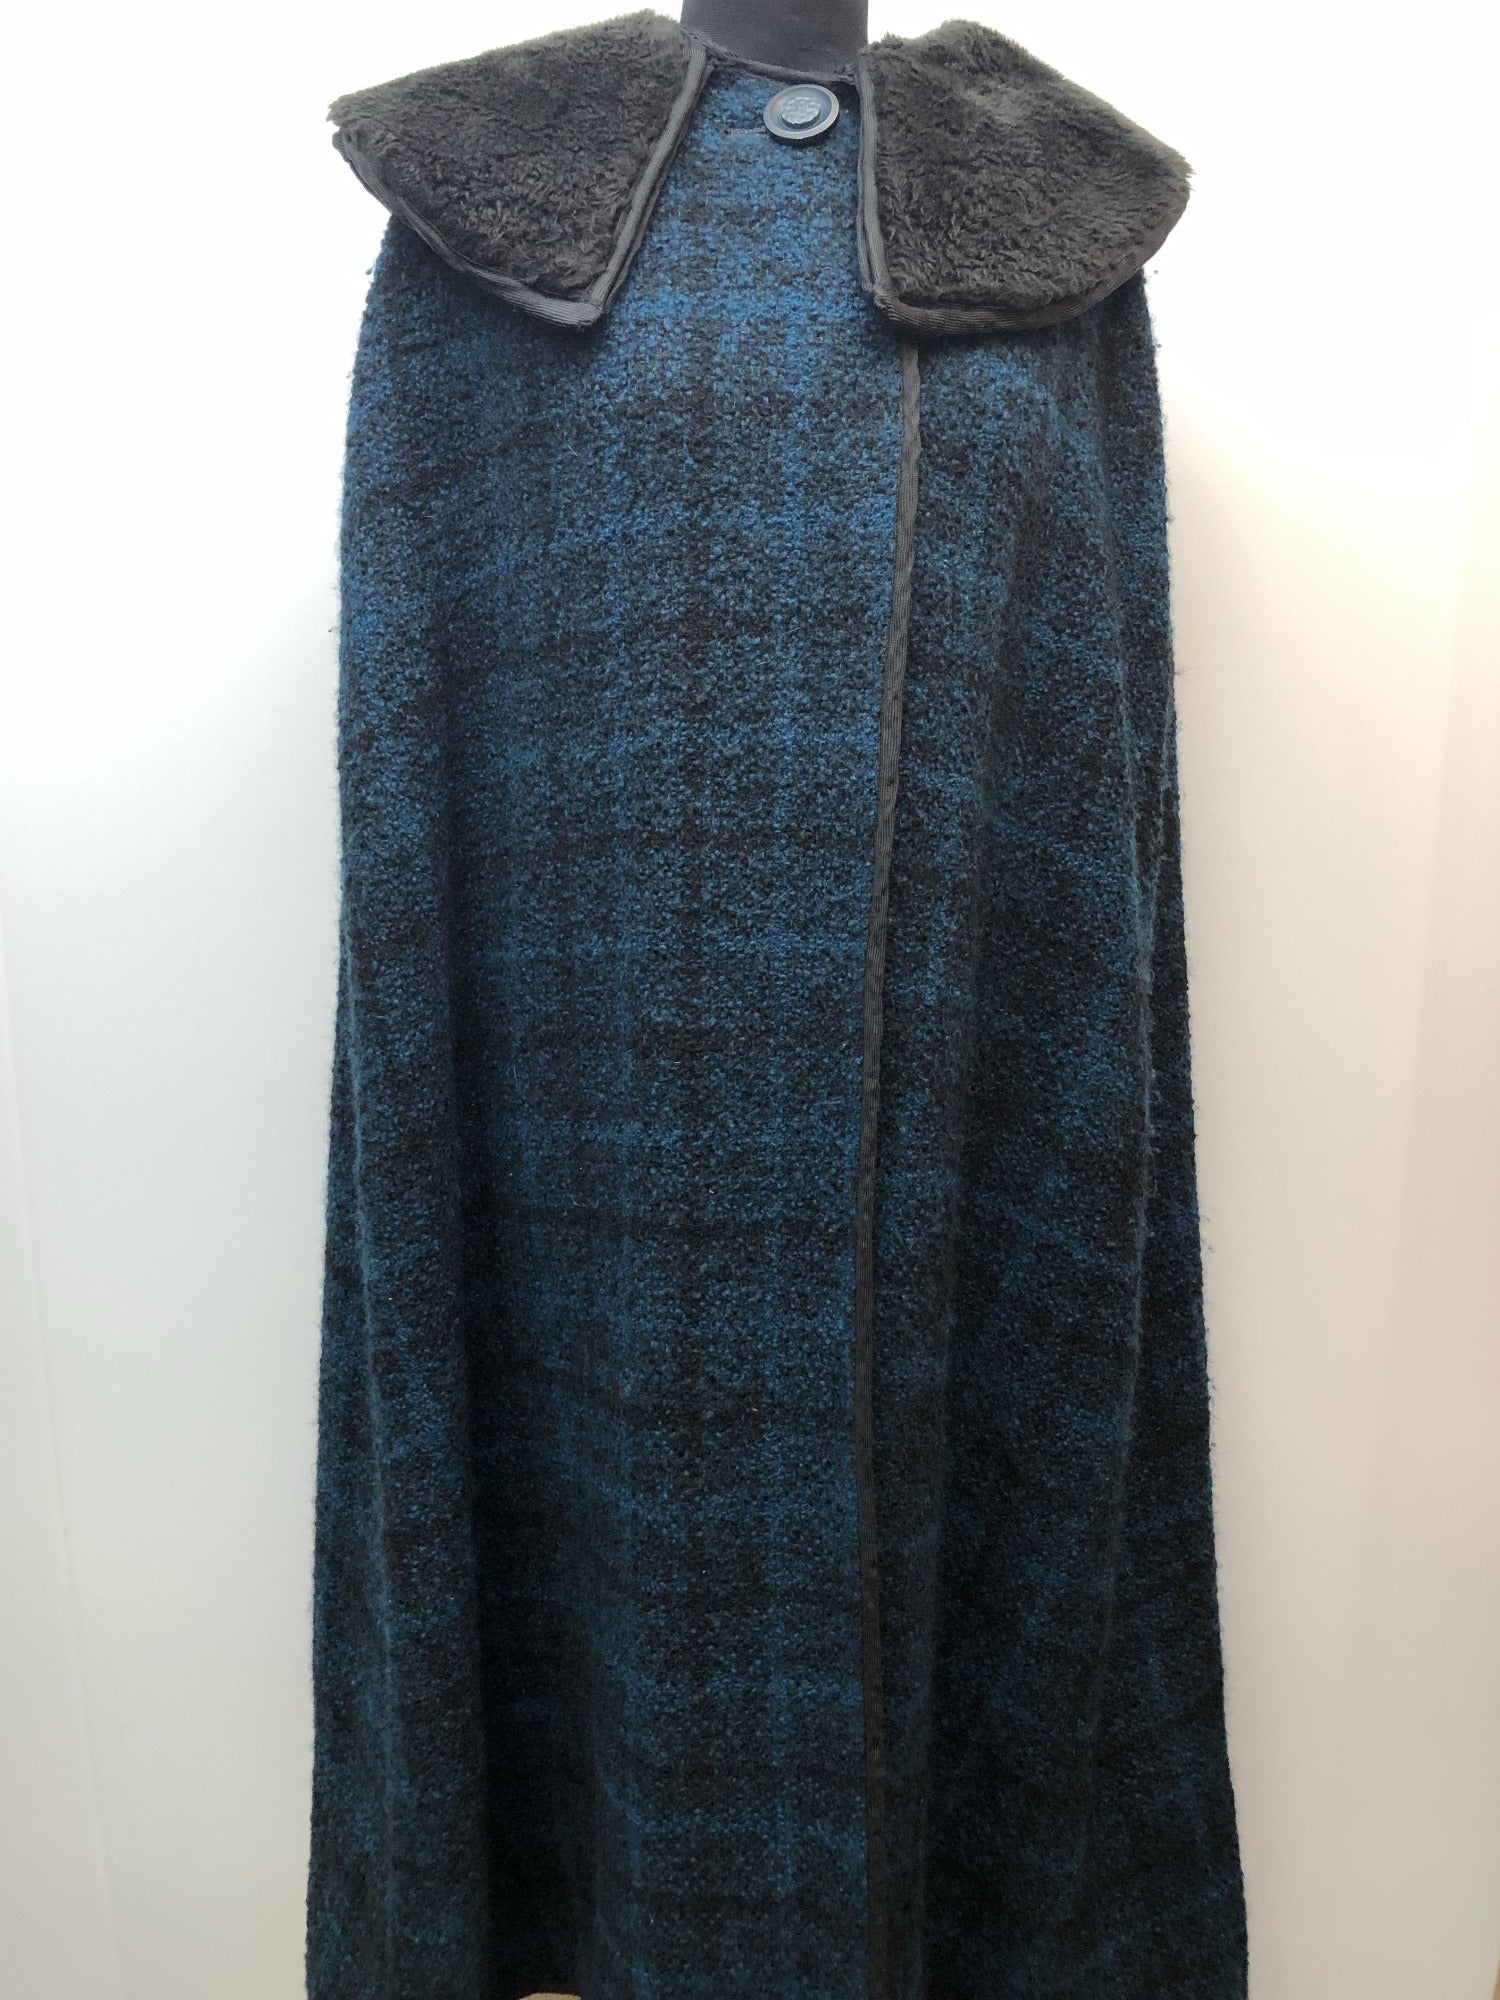 Vintage 1950s Full Length Otterburn Tweed Cape in Turquoise - One Size